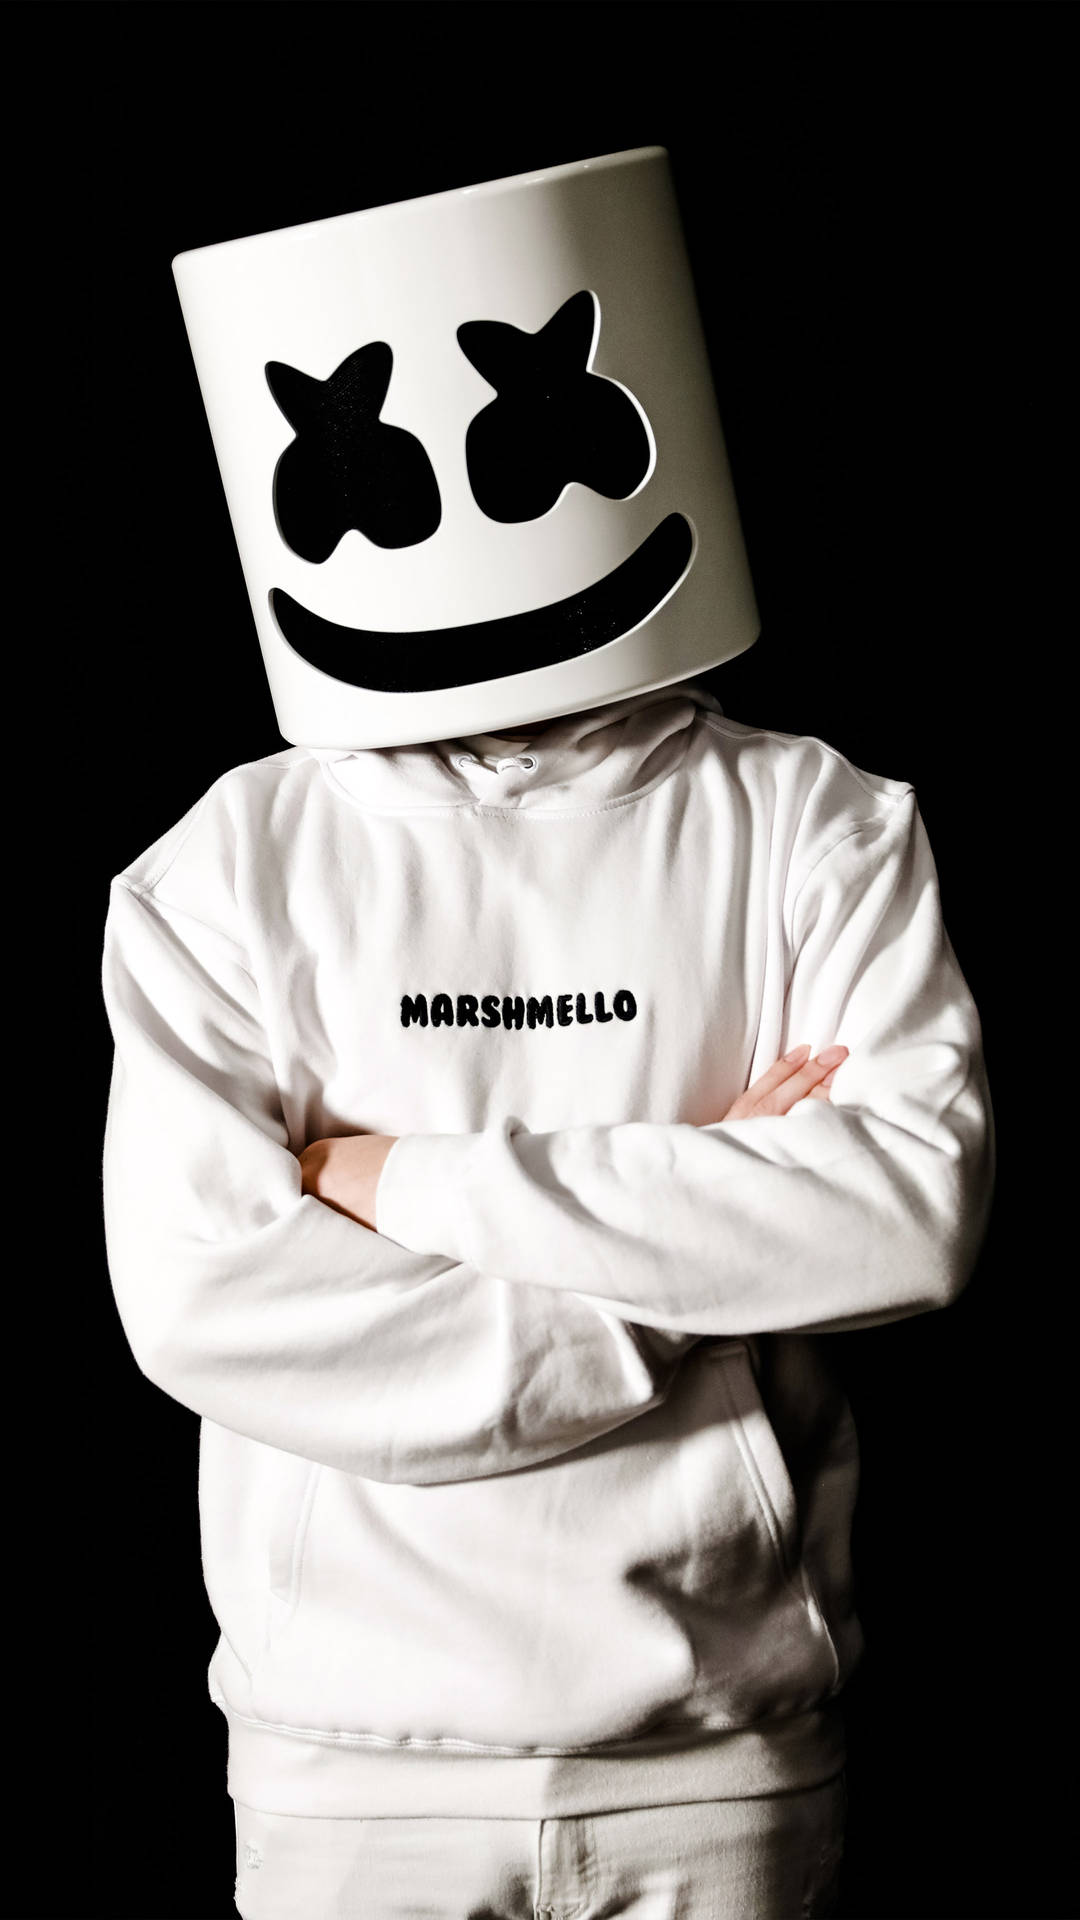 Black Marshmello With Crossed Arms Wallpaper